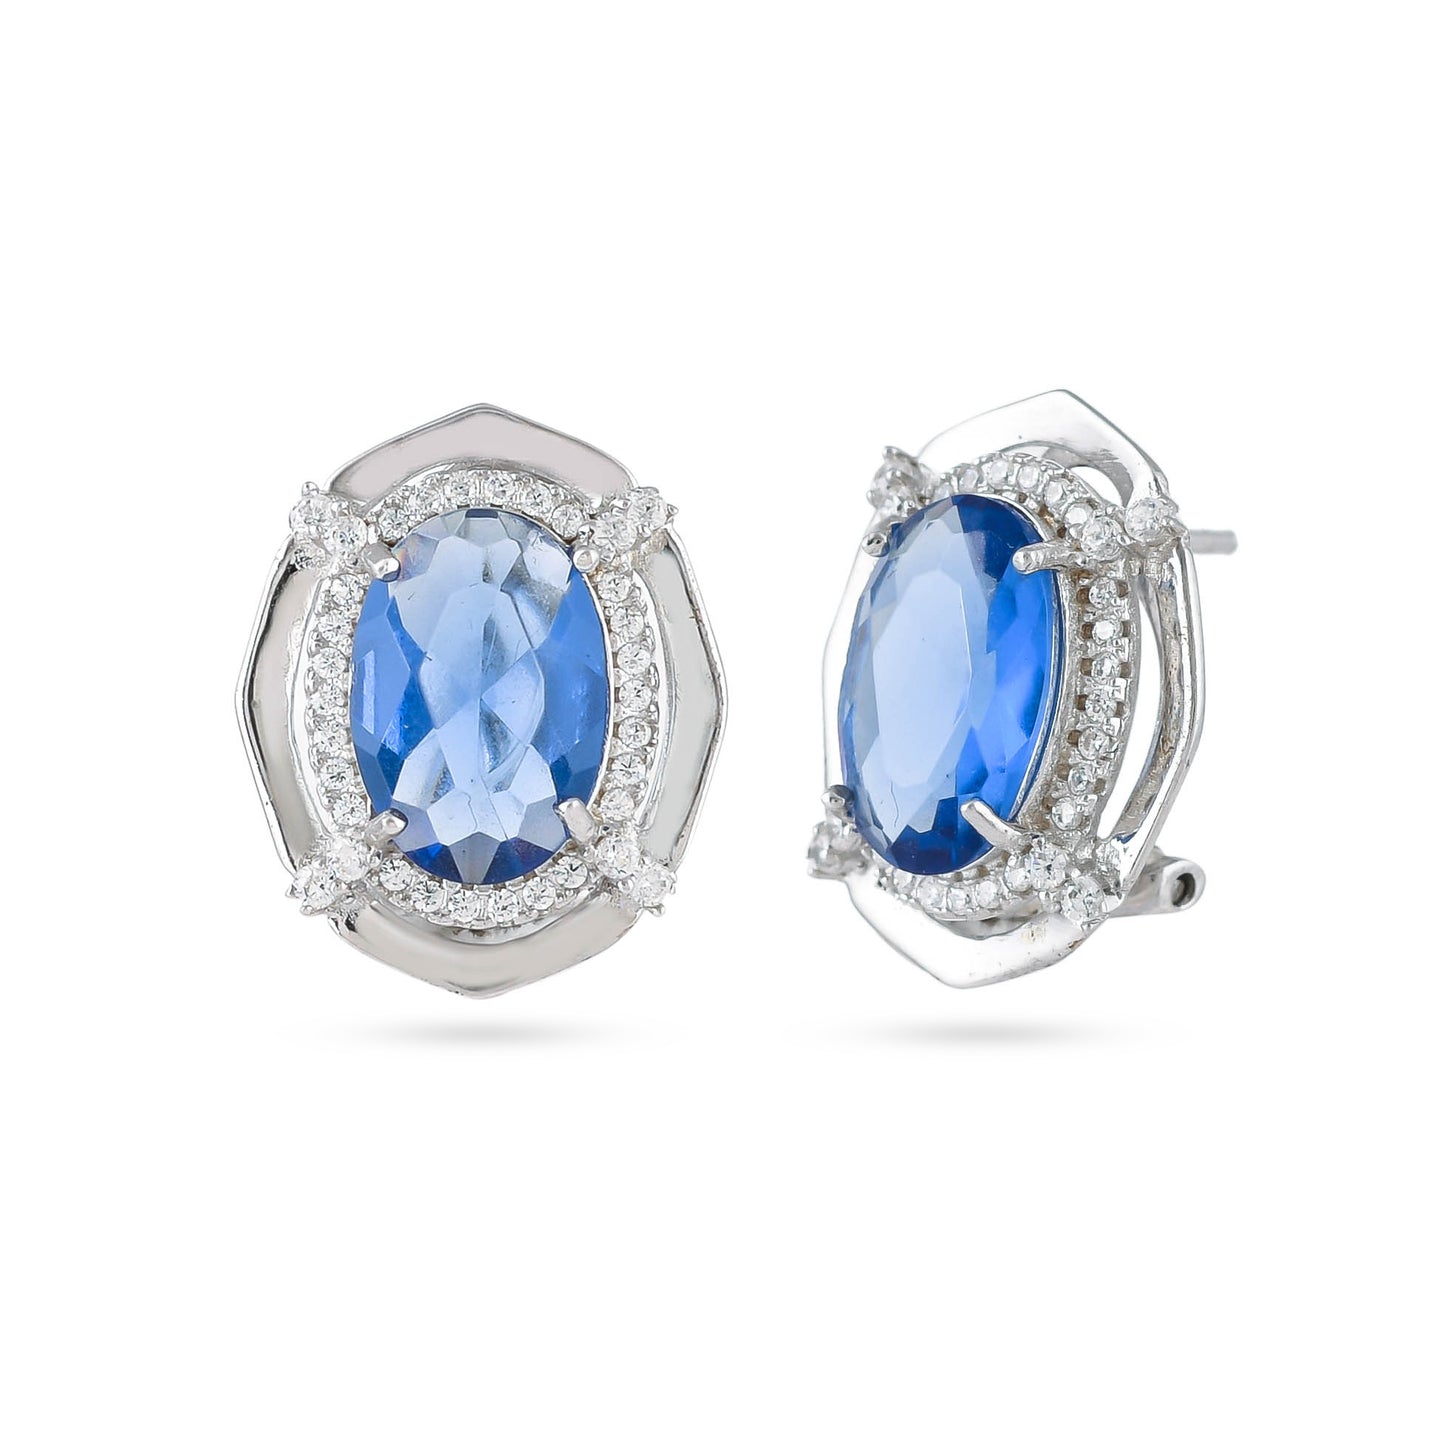 Sparkling Blue Cz Silver Earrings - From Purl Purl